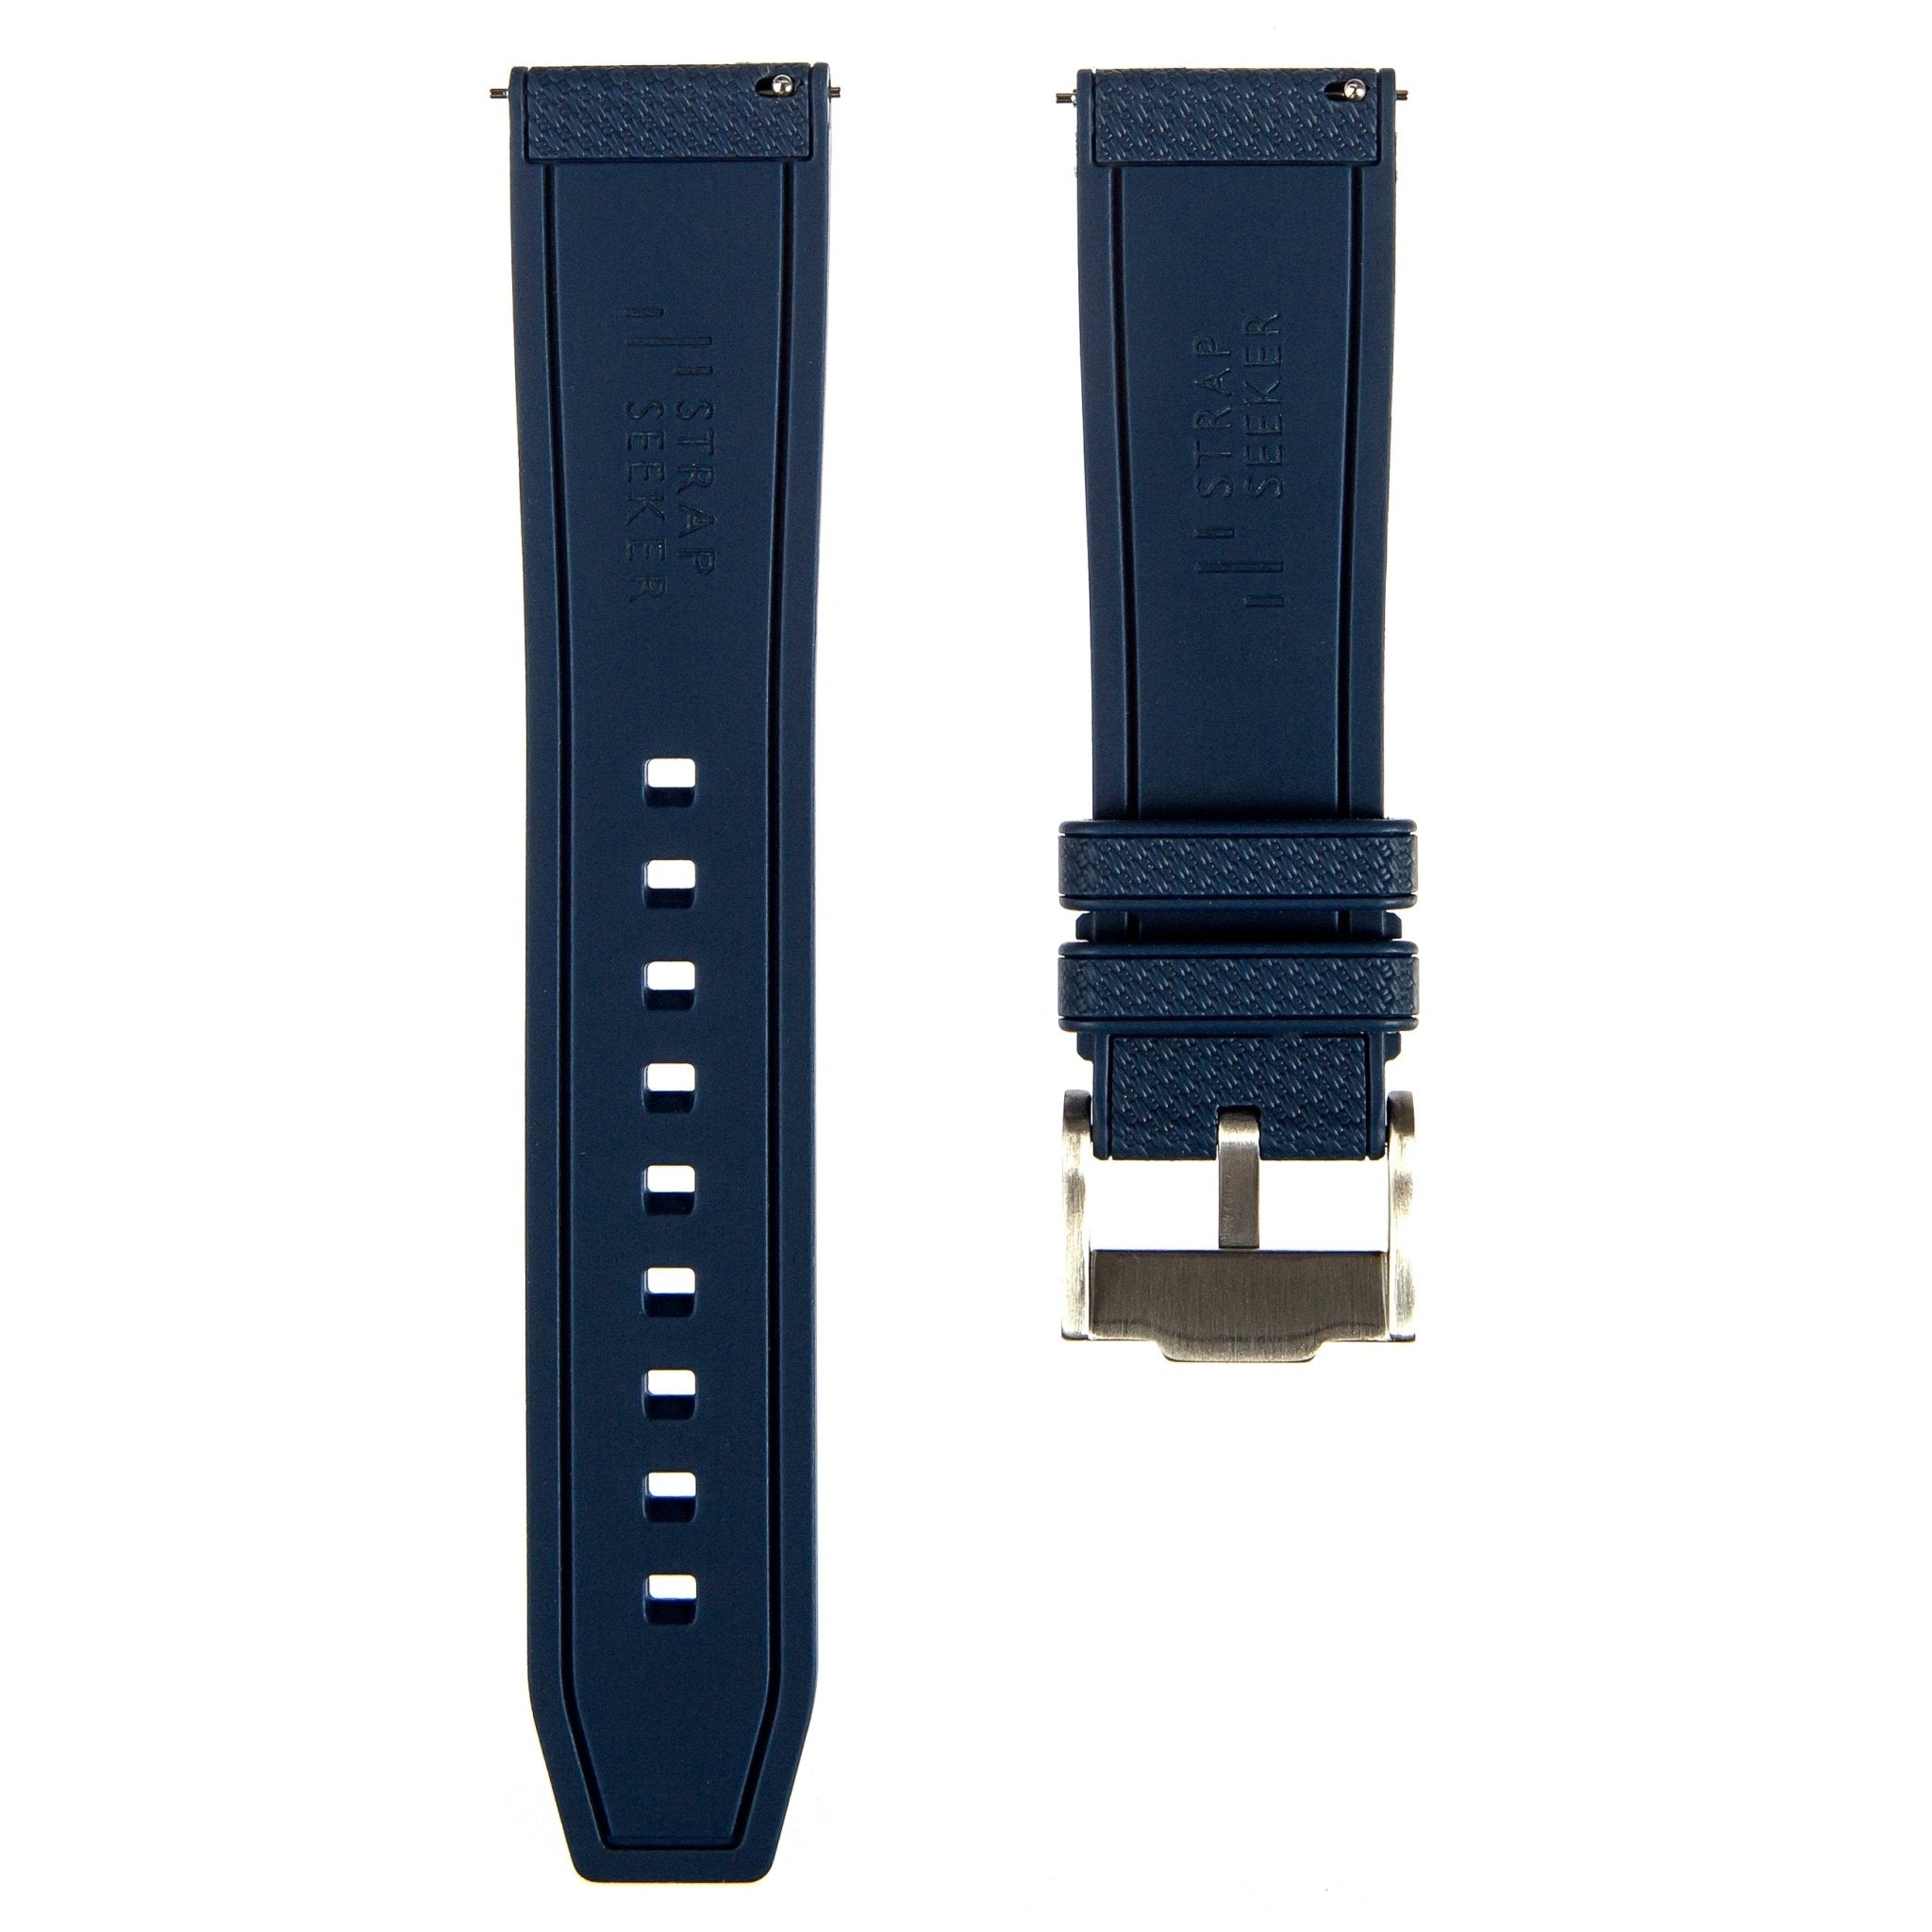 Flexweave Premium SIlicone Rubber Strap - Quick-Release - Compatible with Blancpain x Swatch – Navy (2423) -Strapseeker